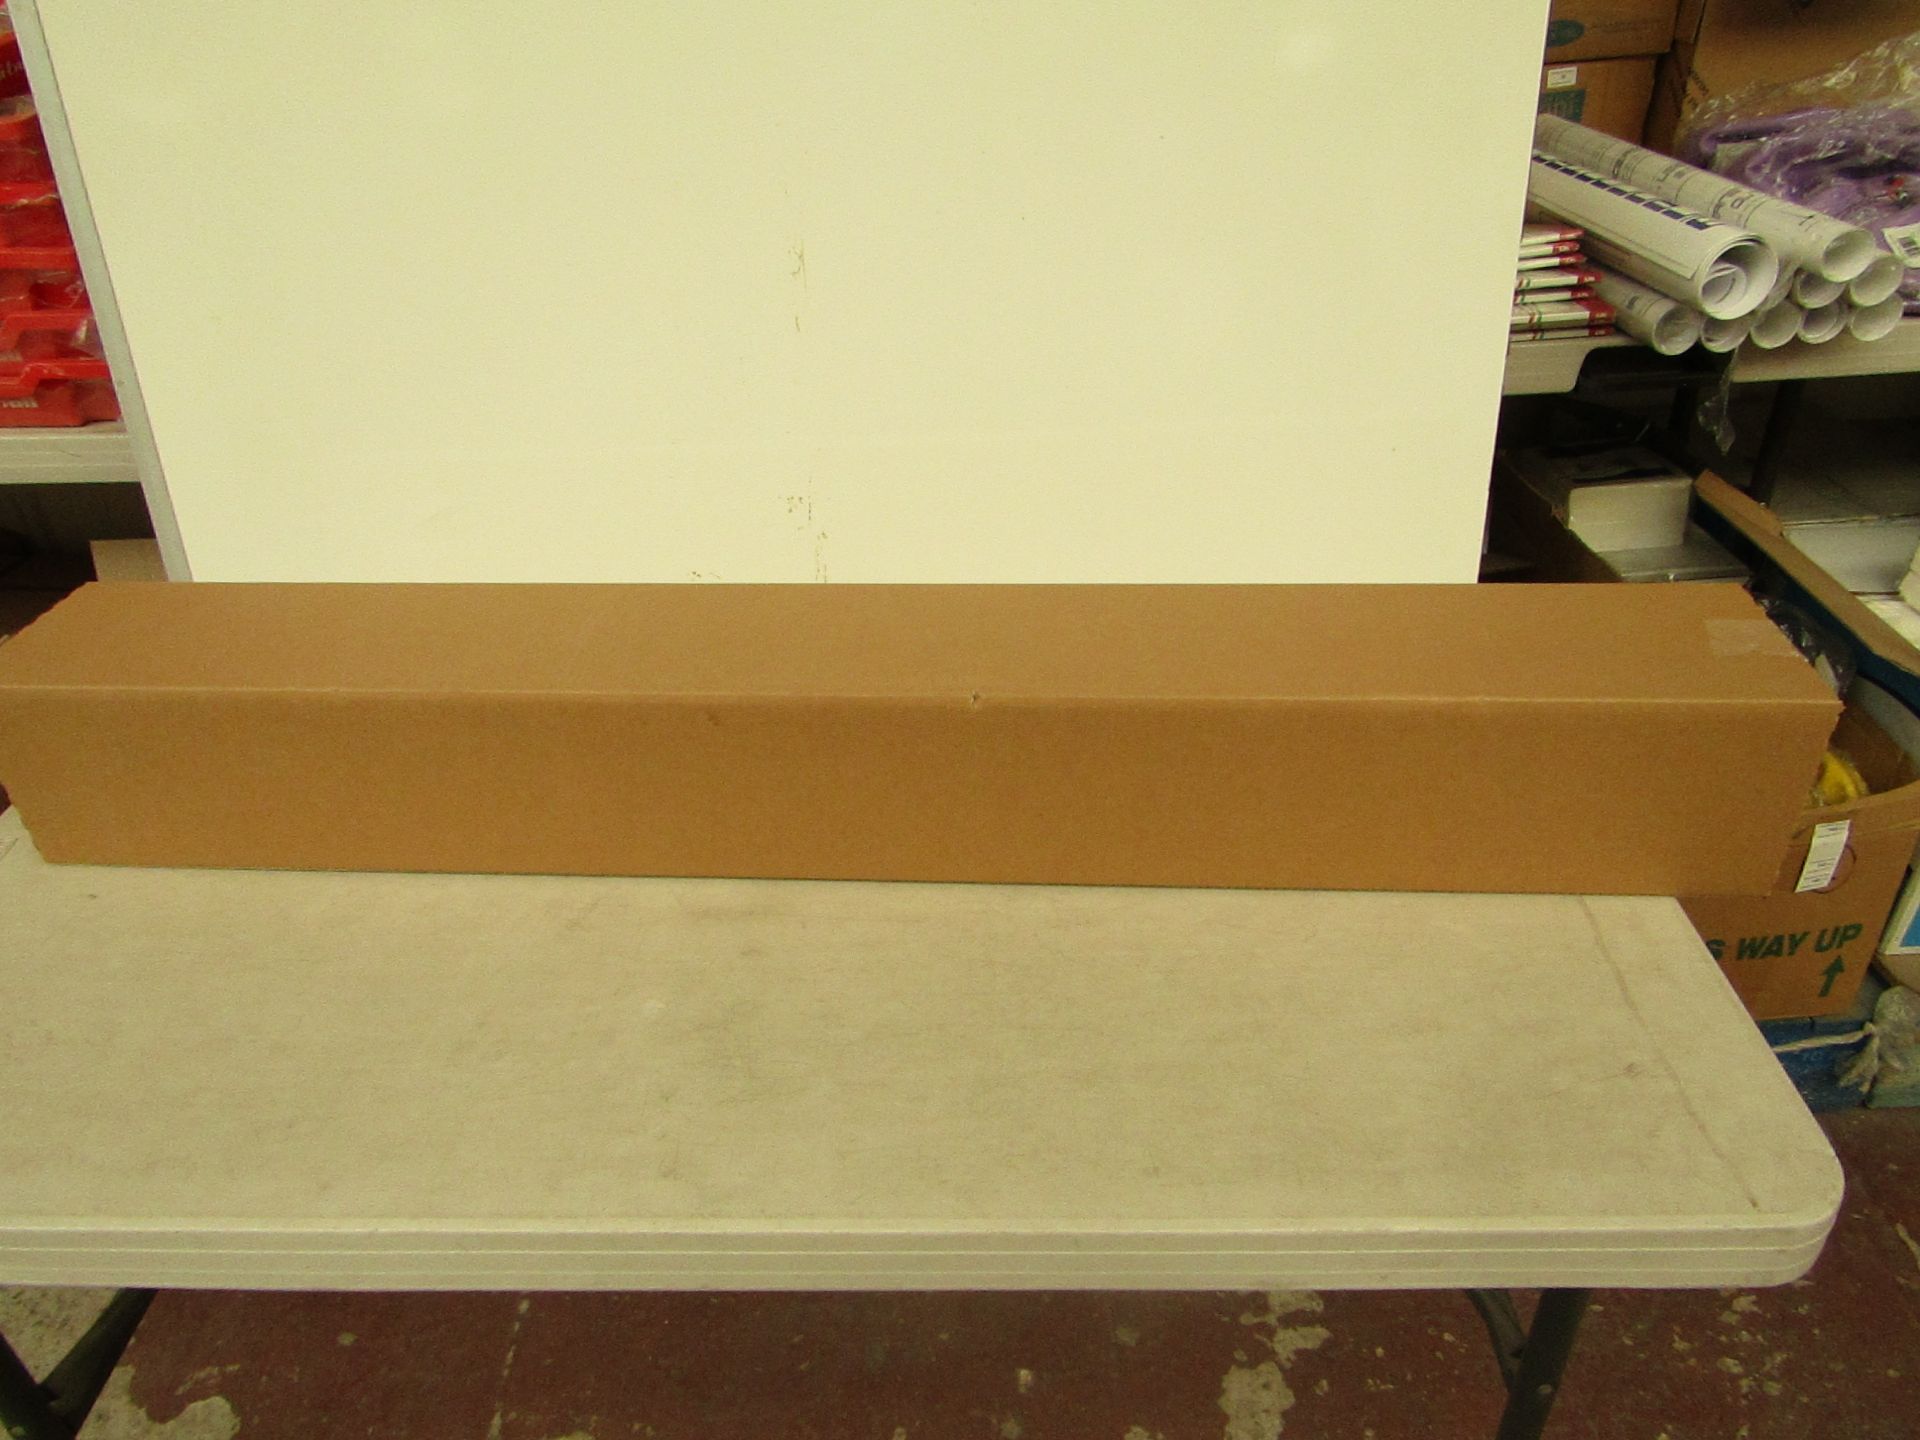 10x Packs of 20 Cardboard boxes, approx 121x17x17cm, all new in banding.